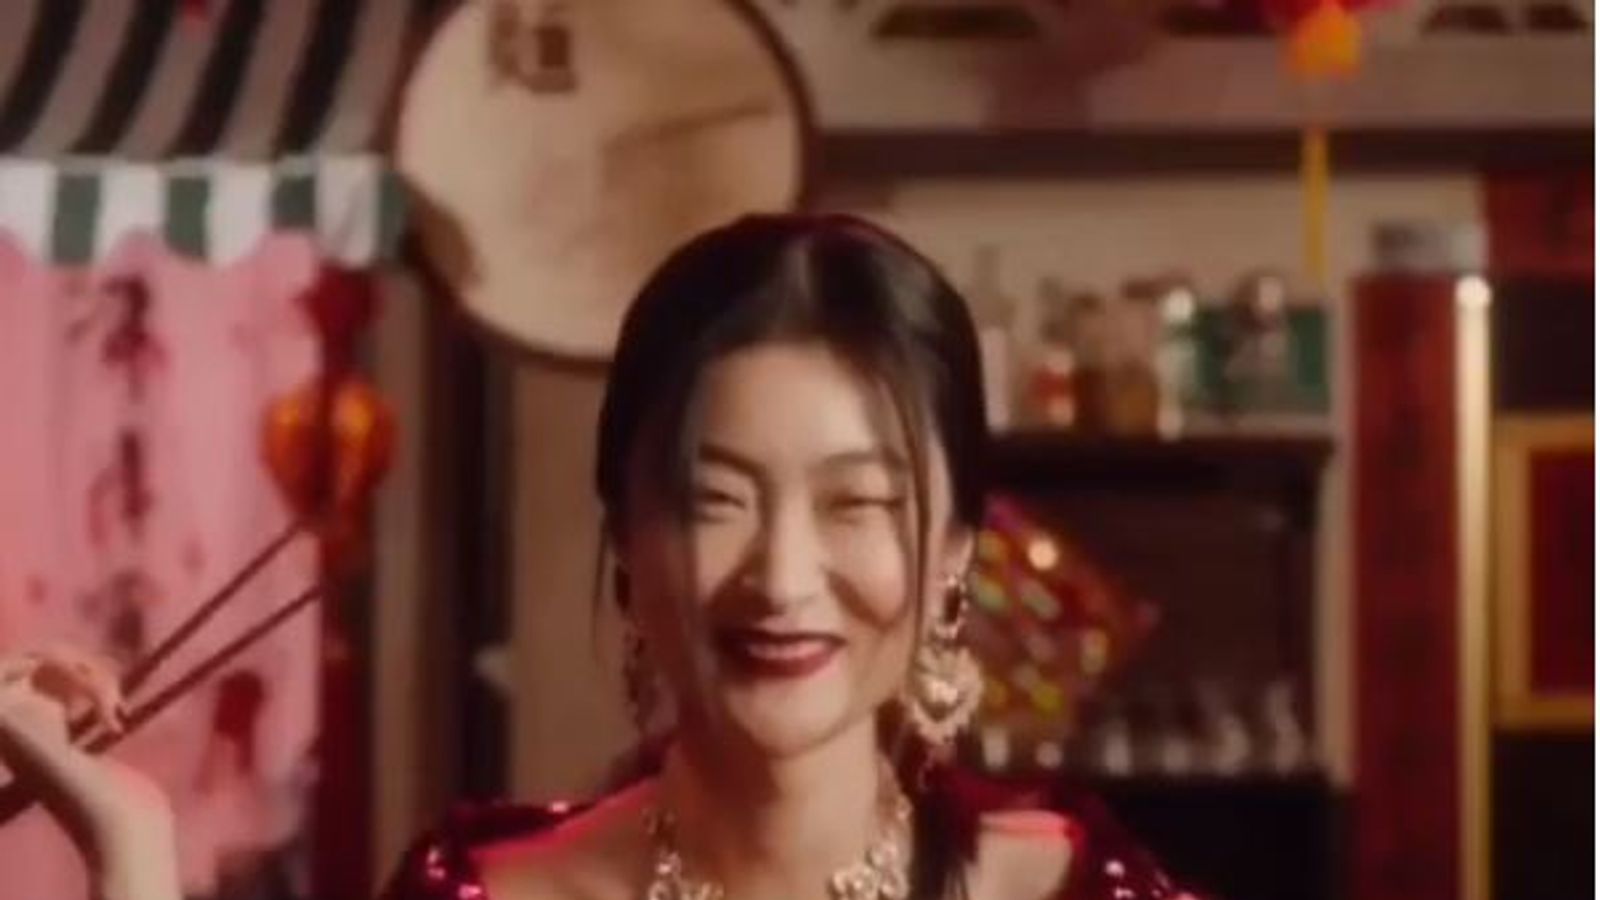 Dolce & Gabbana's 'Chinese Chopsticks' Ad Isn't the Only Reason We Should  Stop Supporting Them